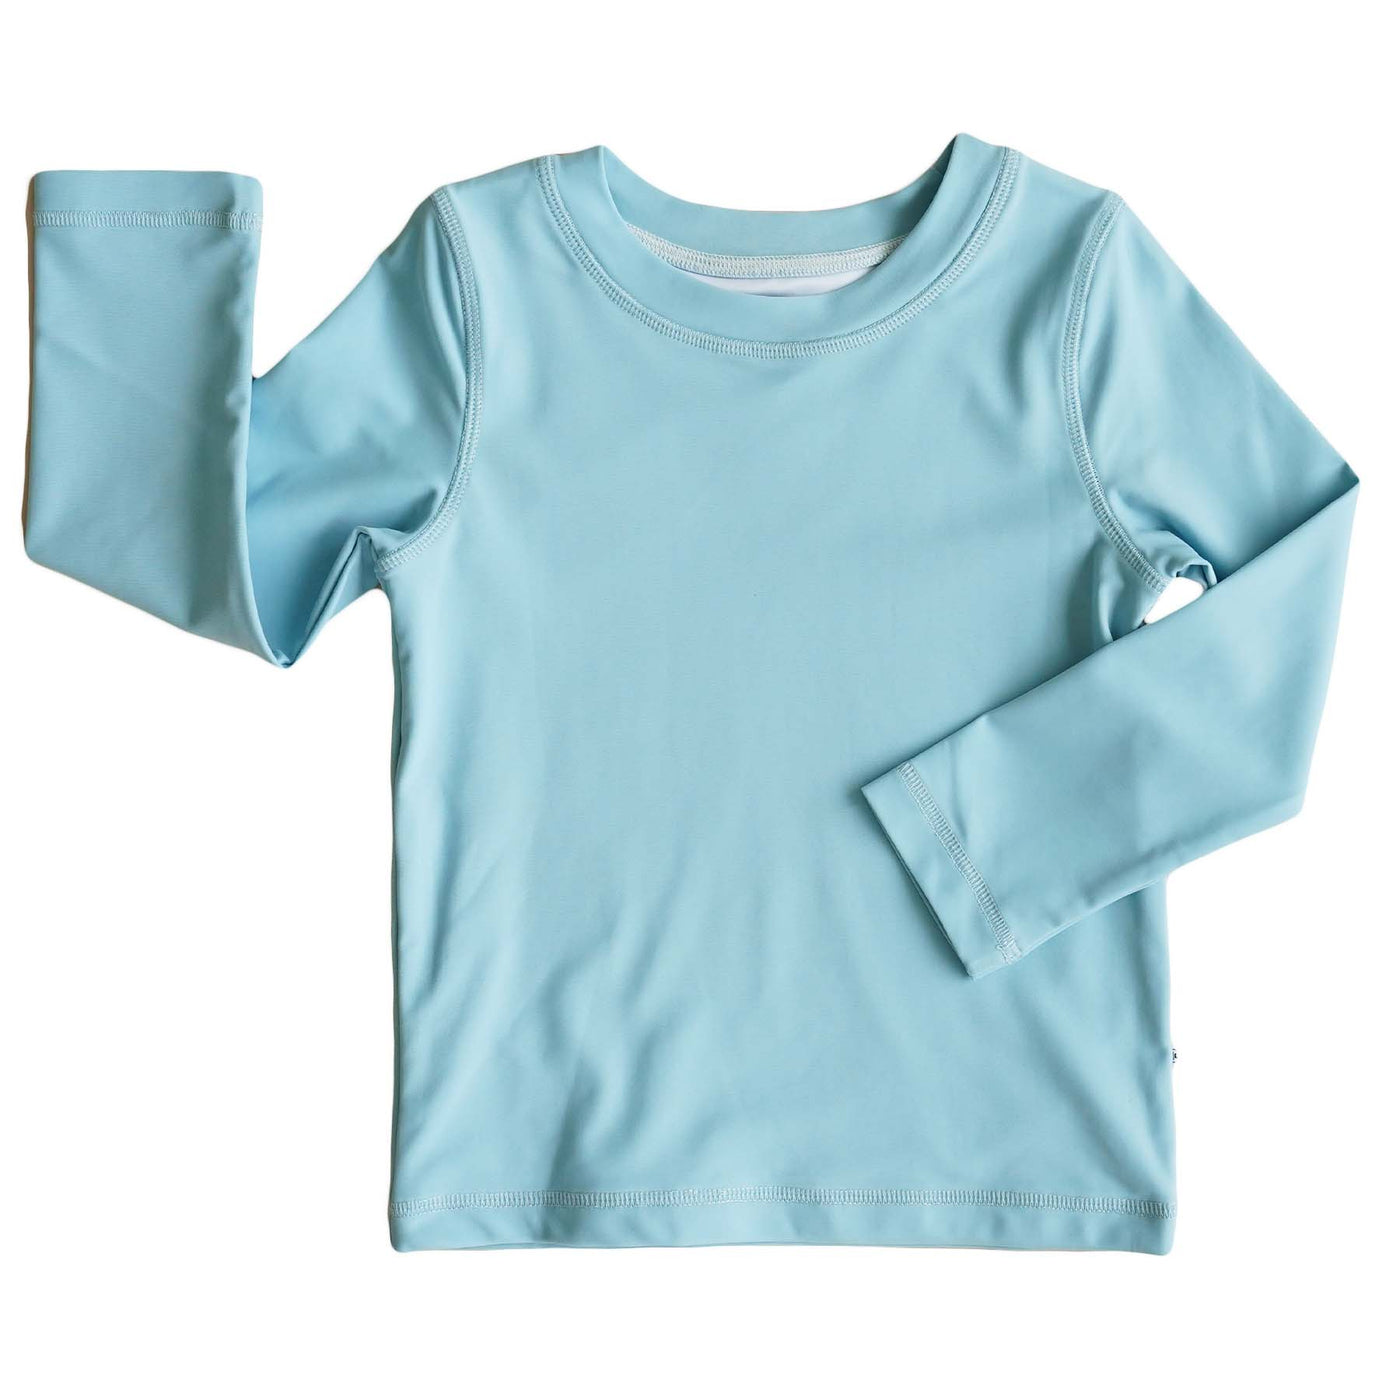 sun's out rash guard shirt for boys with long sleeves